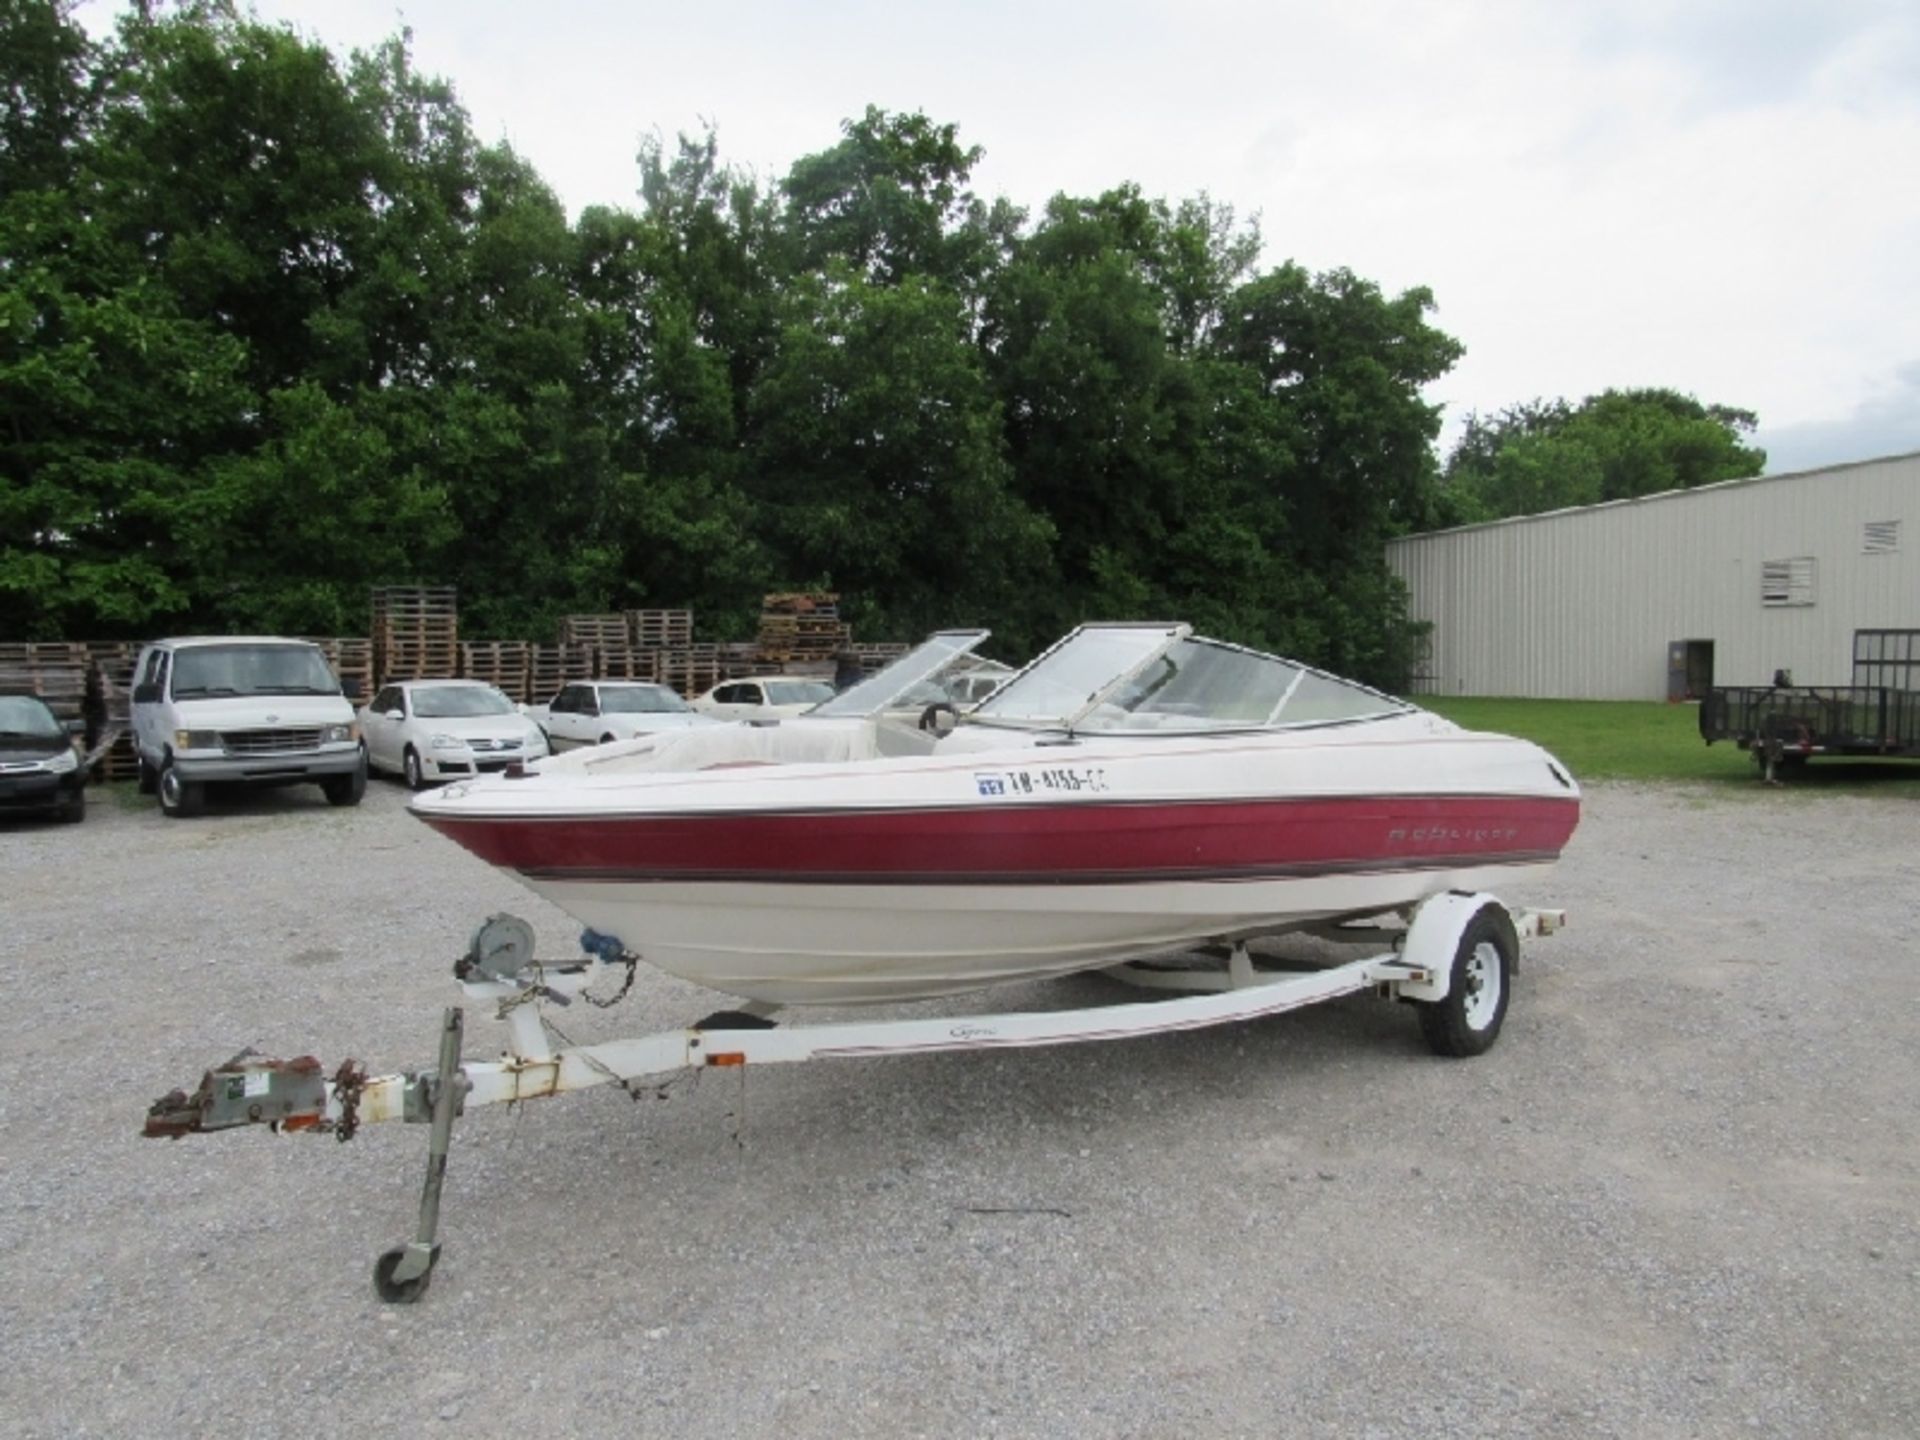 1997 Bayliner Boat- ***Located in Chattanooga, TN*** MFR - Bayliner Model - 2050 CZ 8 Person/ 1050